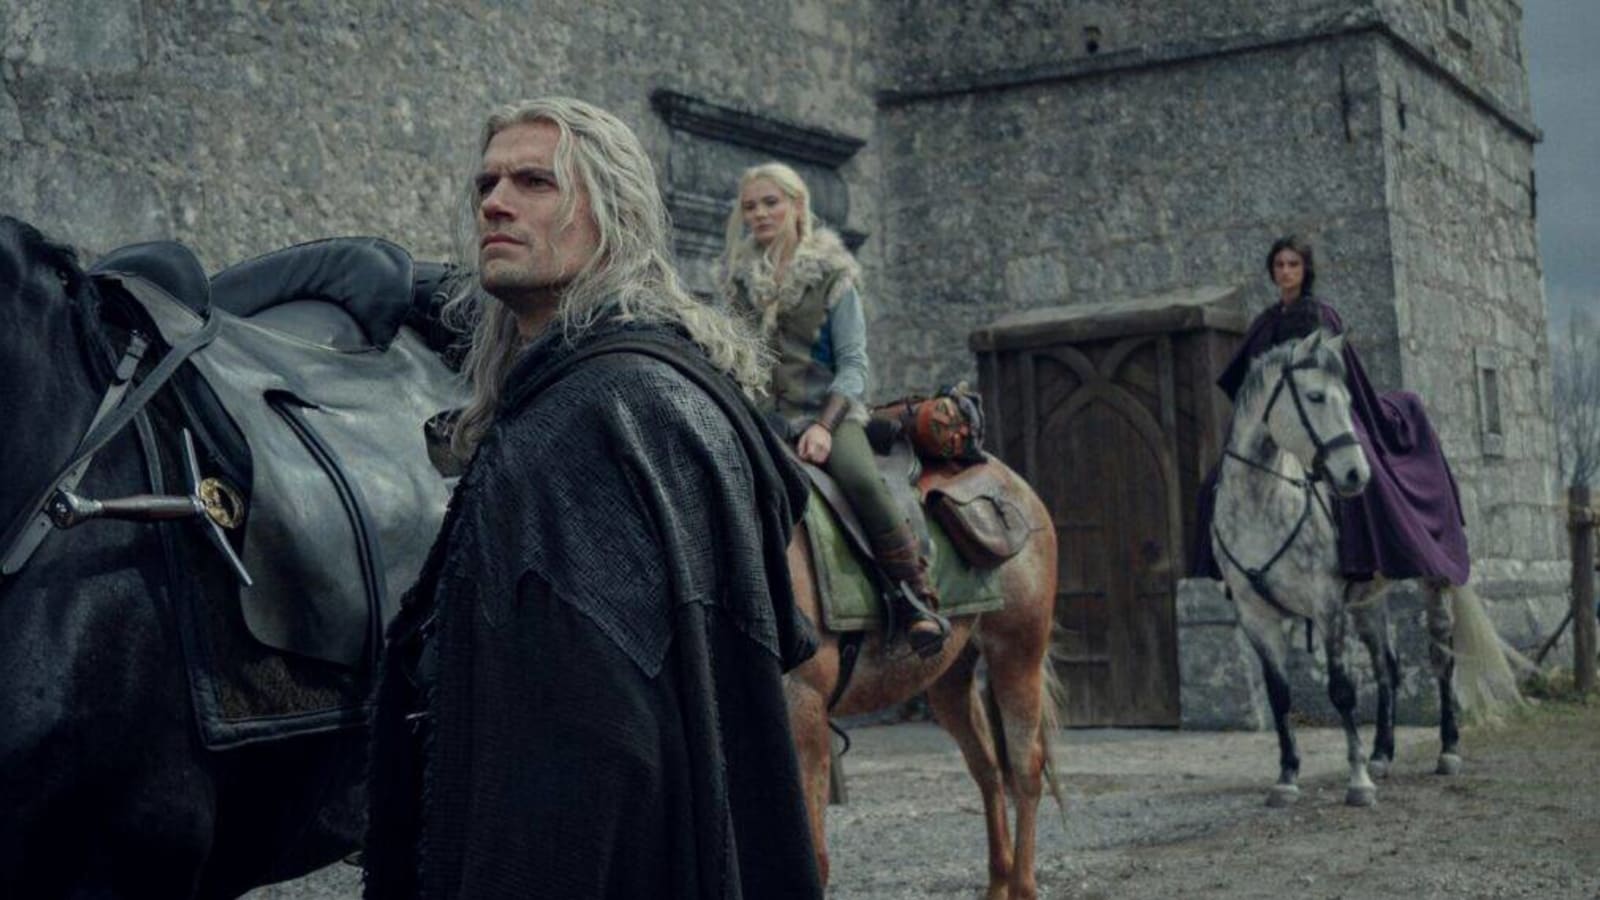 ‘The Witcher’ Season 3: Henry Cavill’s Geralt Fears Change in Volume 1 (VIDEO)